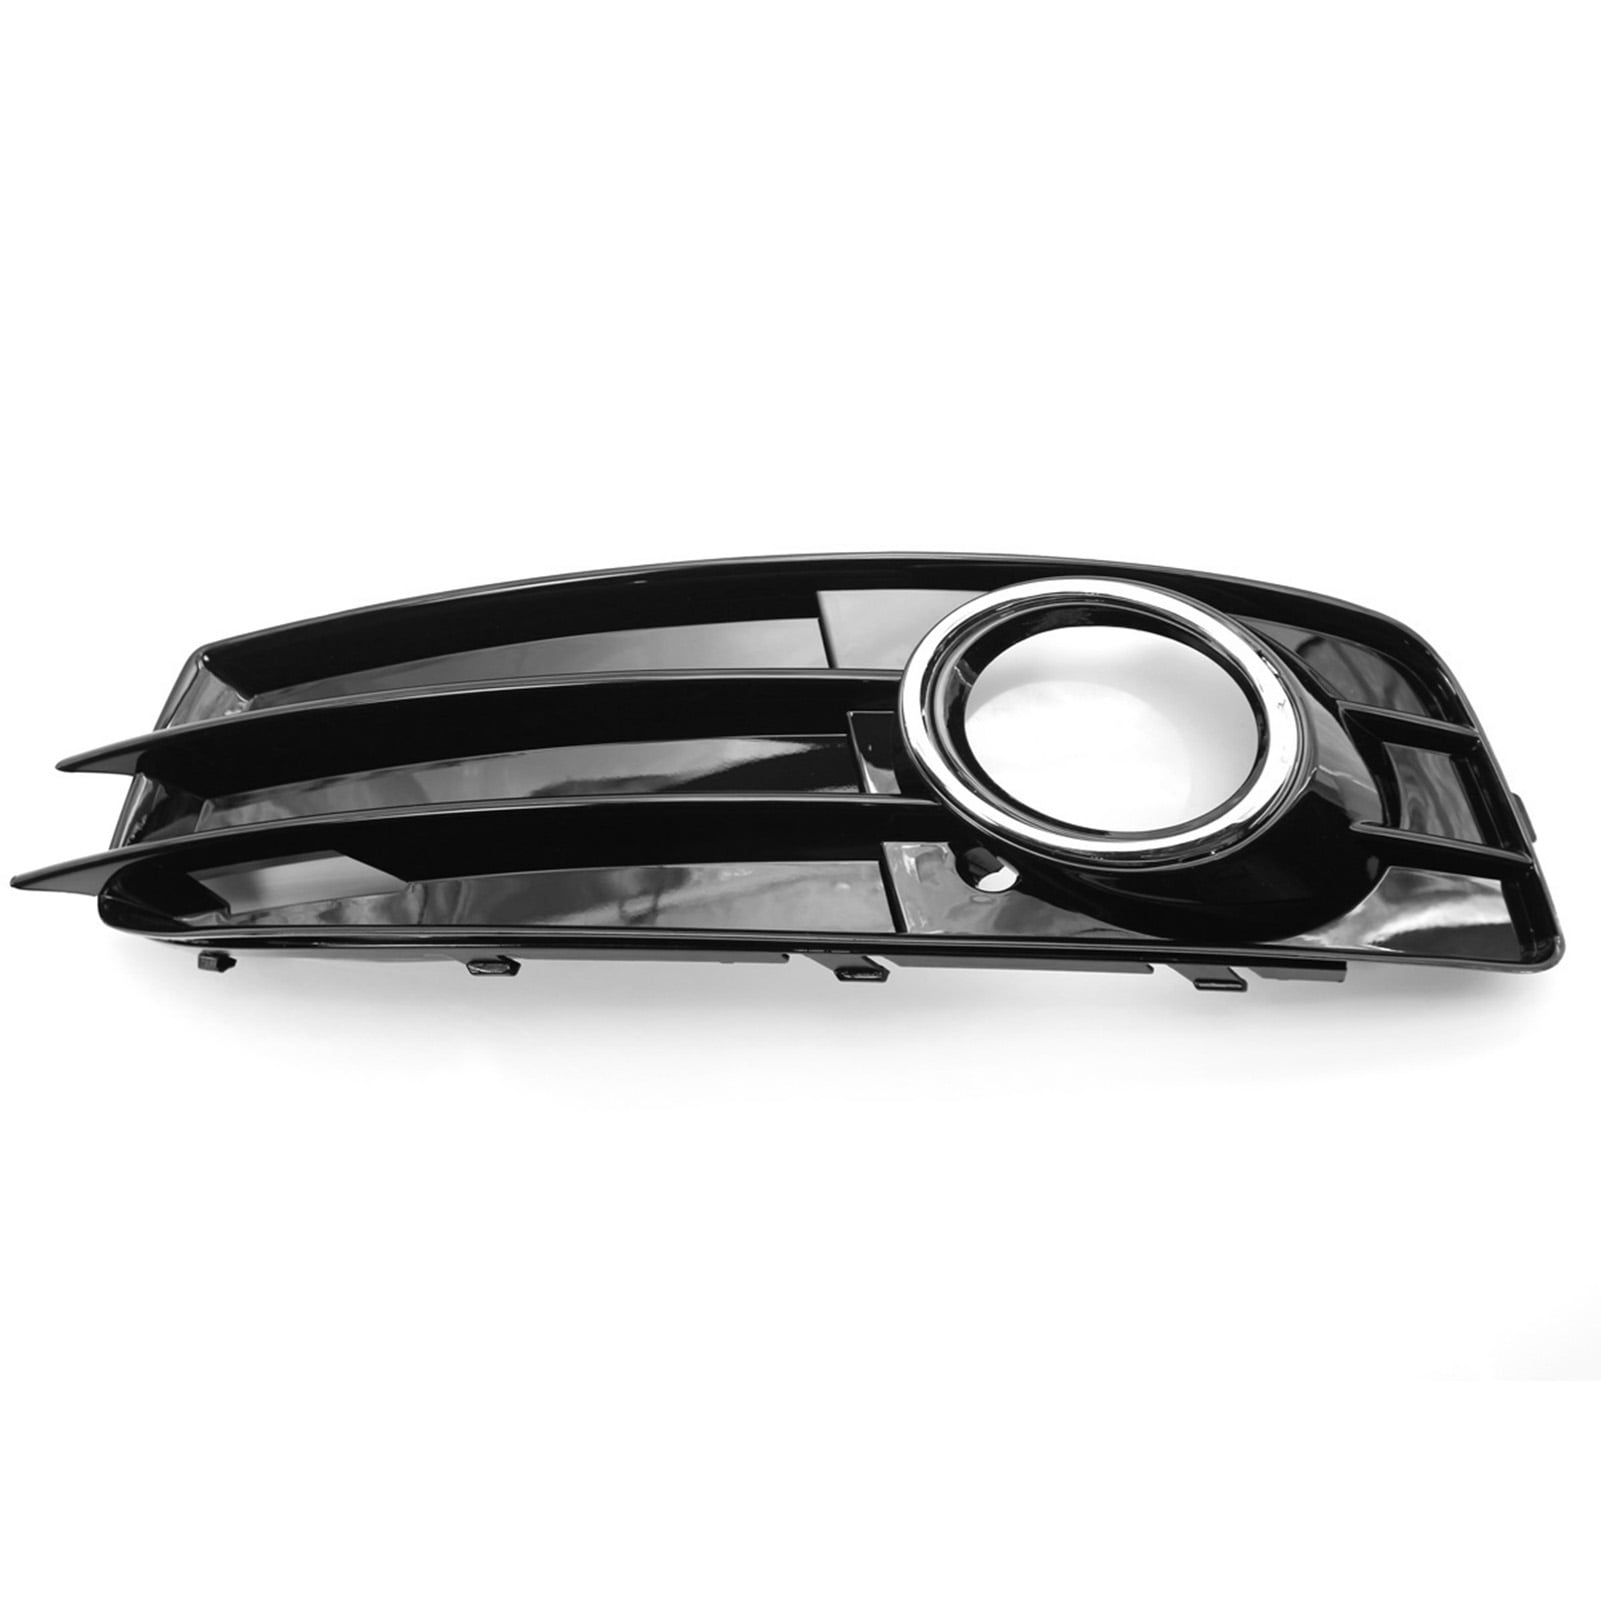 Chrome Door Bowl Molding Cover 8p Kit For 2008 2011 Chevy Cruze